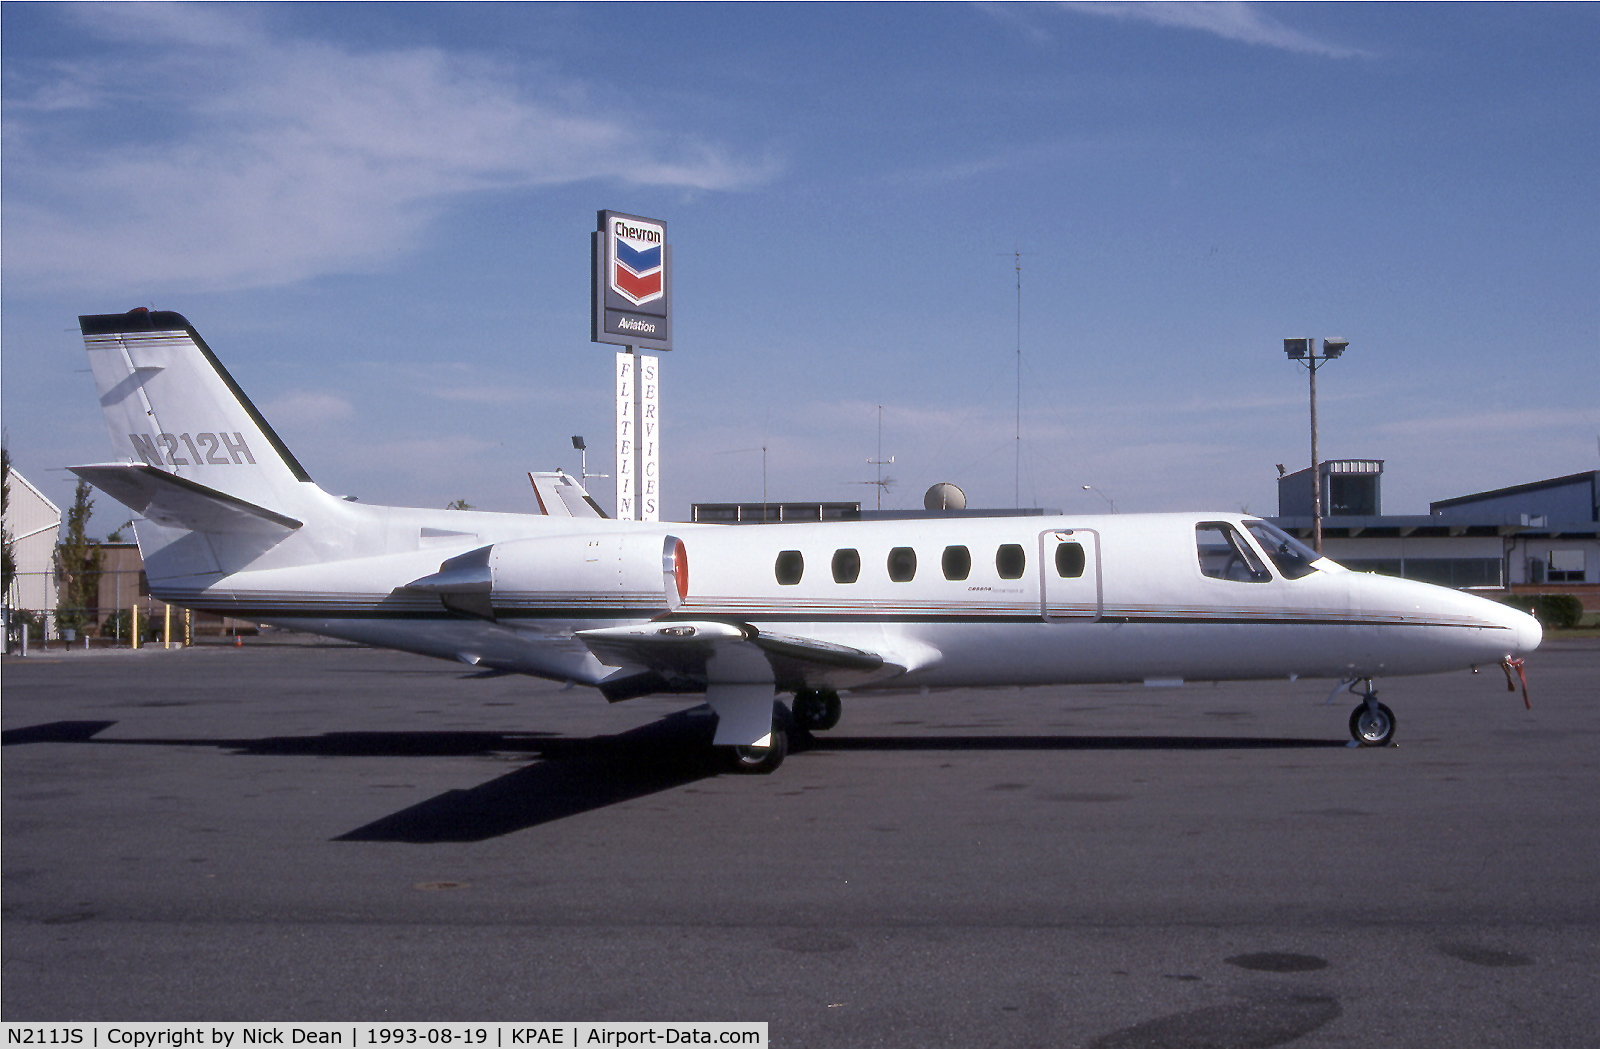 N211JS, 1979 Cessna 550 C/N 550-0098, KPAE (Seen here as N212H this aircraft is currently registered N211JS C/N's 550-0098 and 551-0140 are applicable to this airframe)